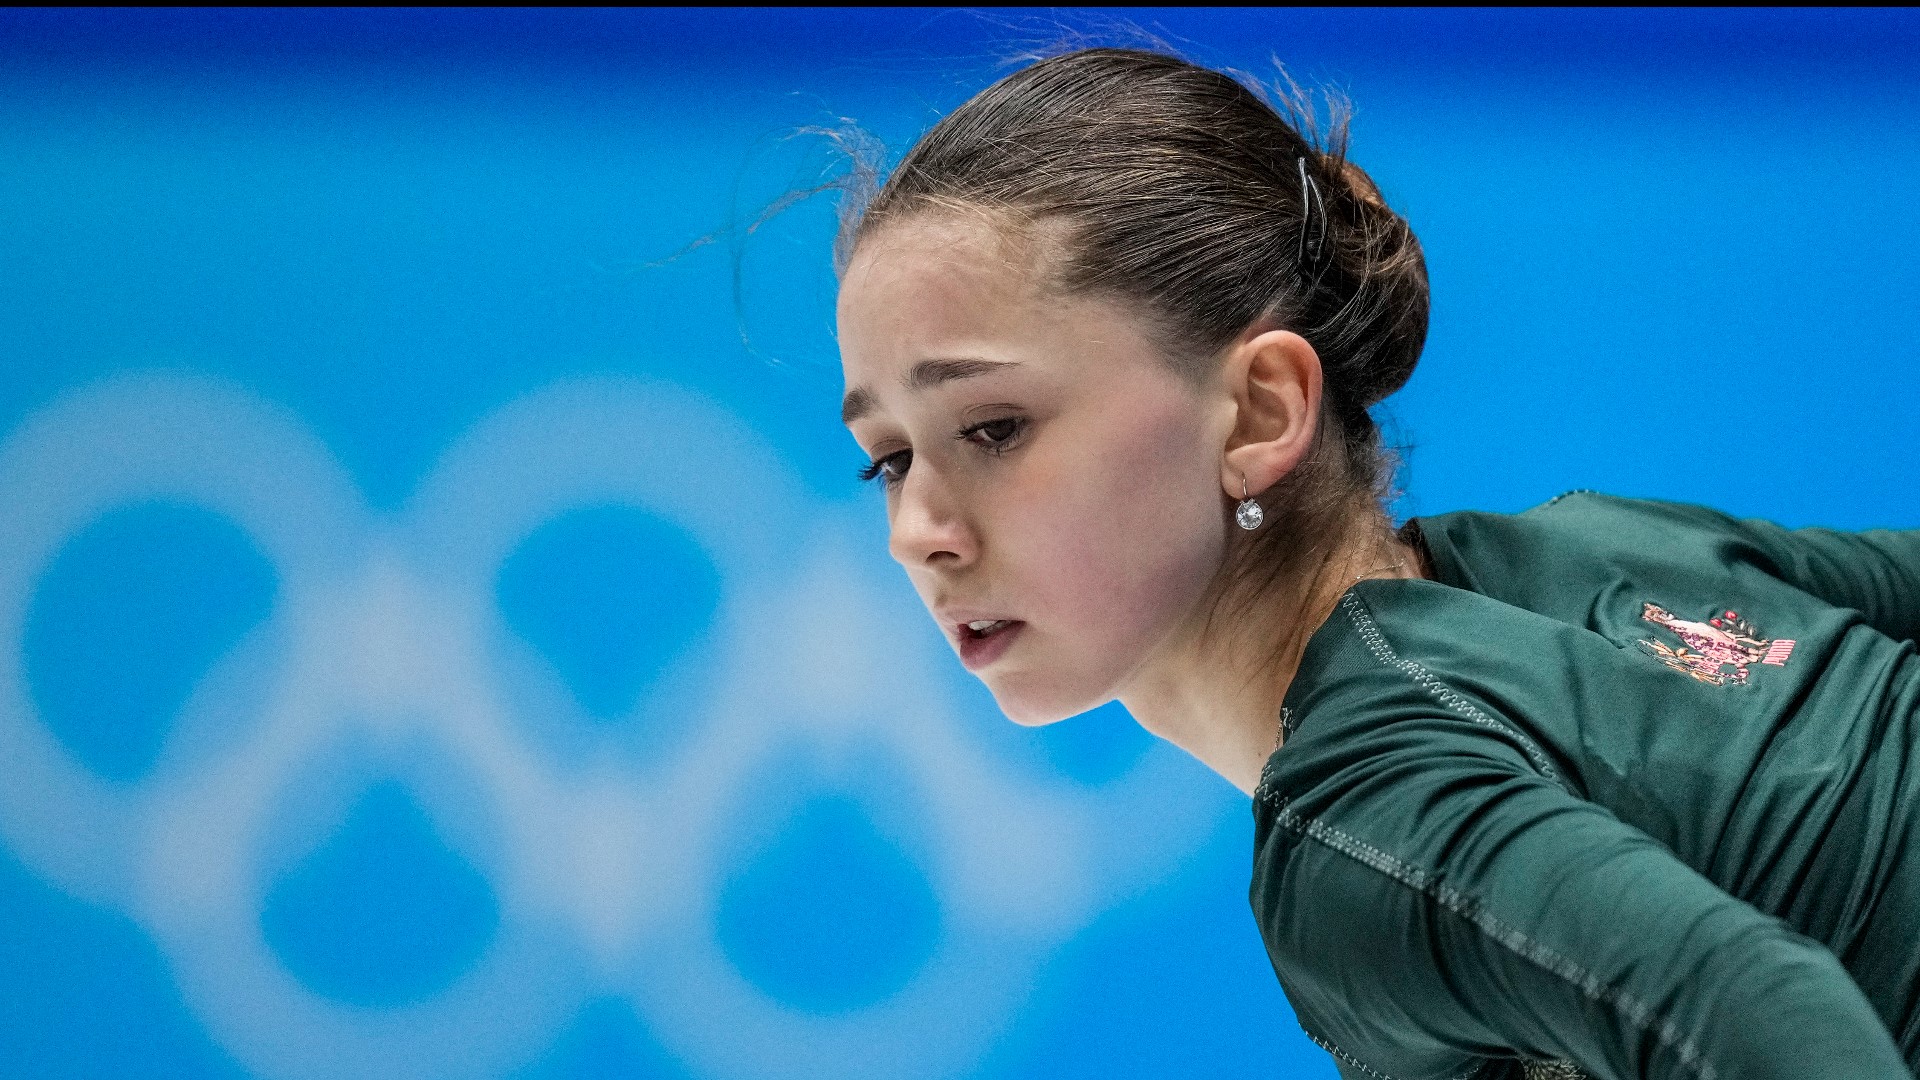 The ruling allows Kamila Valieva to compete in the women's figure skating program at the Olympics. It does not address the team figure skating gold ROC won.